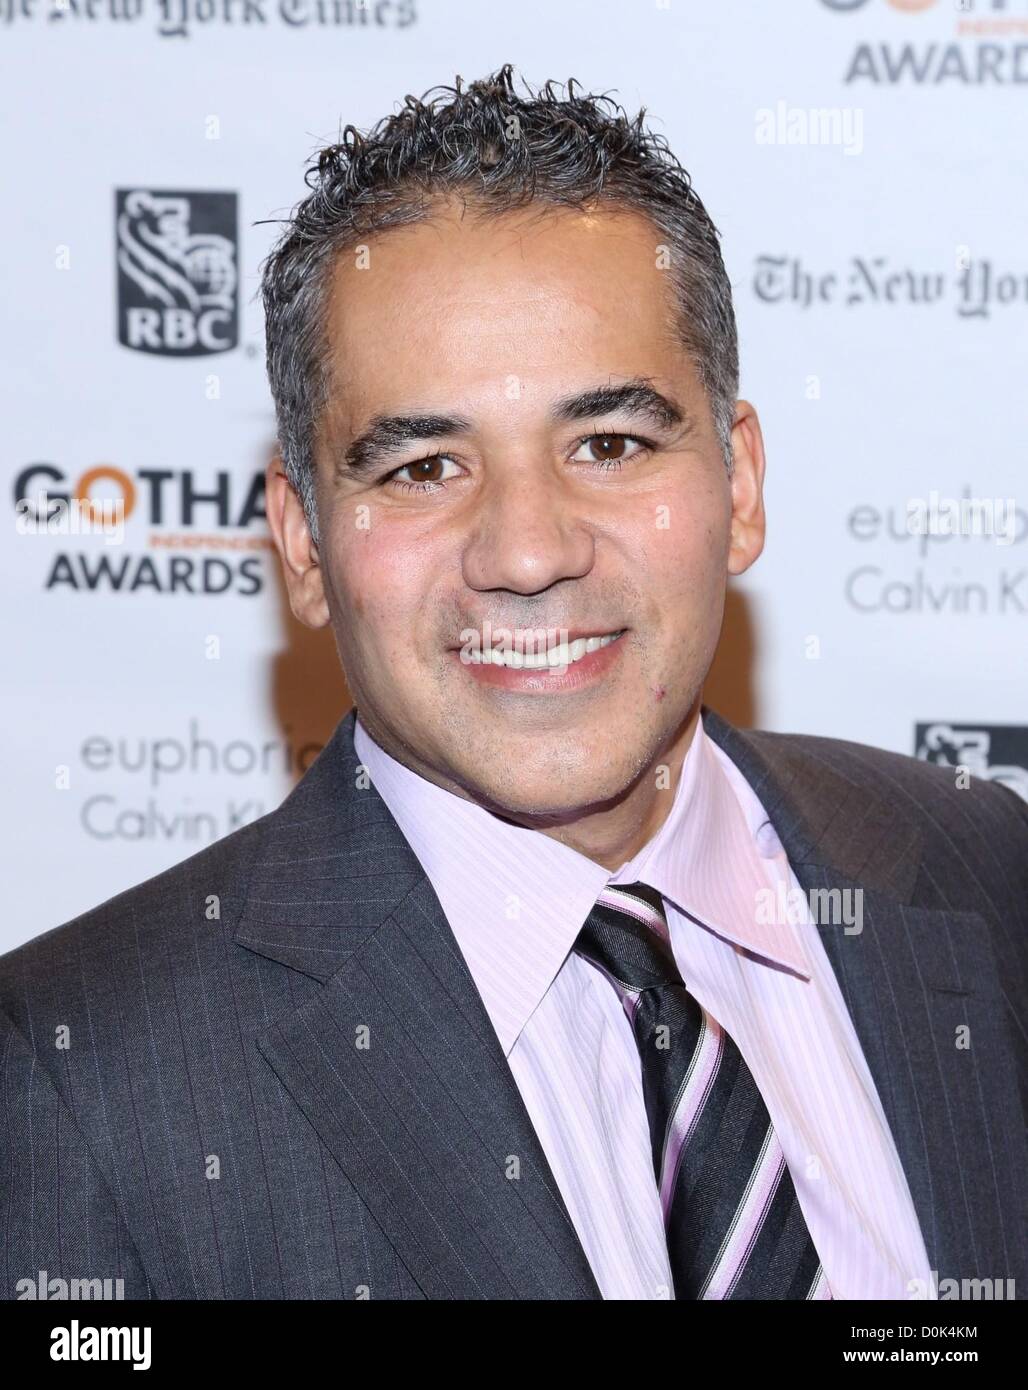 John Ortiz at arrivals for 22nd Annual Gotham Independent Film Awards, Cipriani Wall Street, New York, NY November 26, 2012. Photo By: Andres Otero/Everett Collection Stock Photo